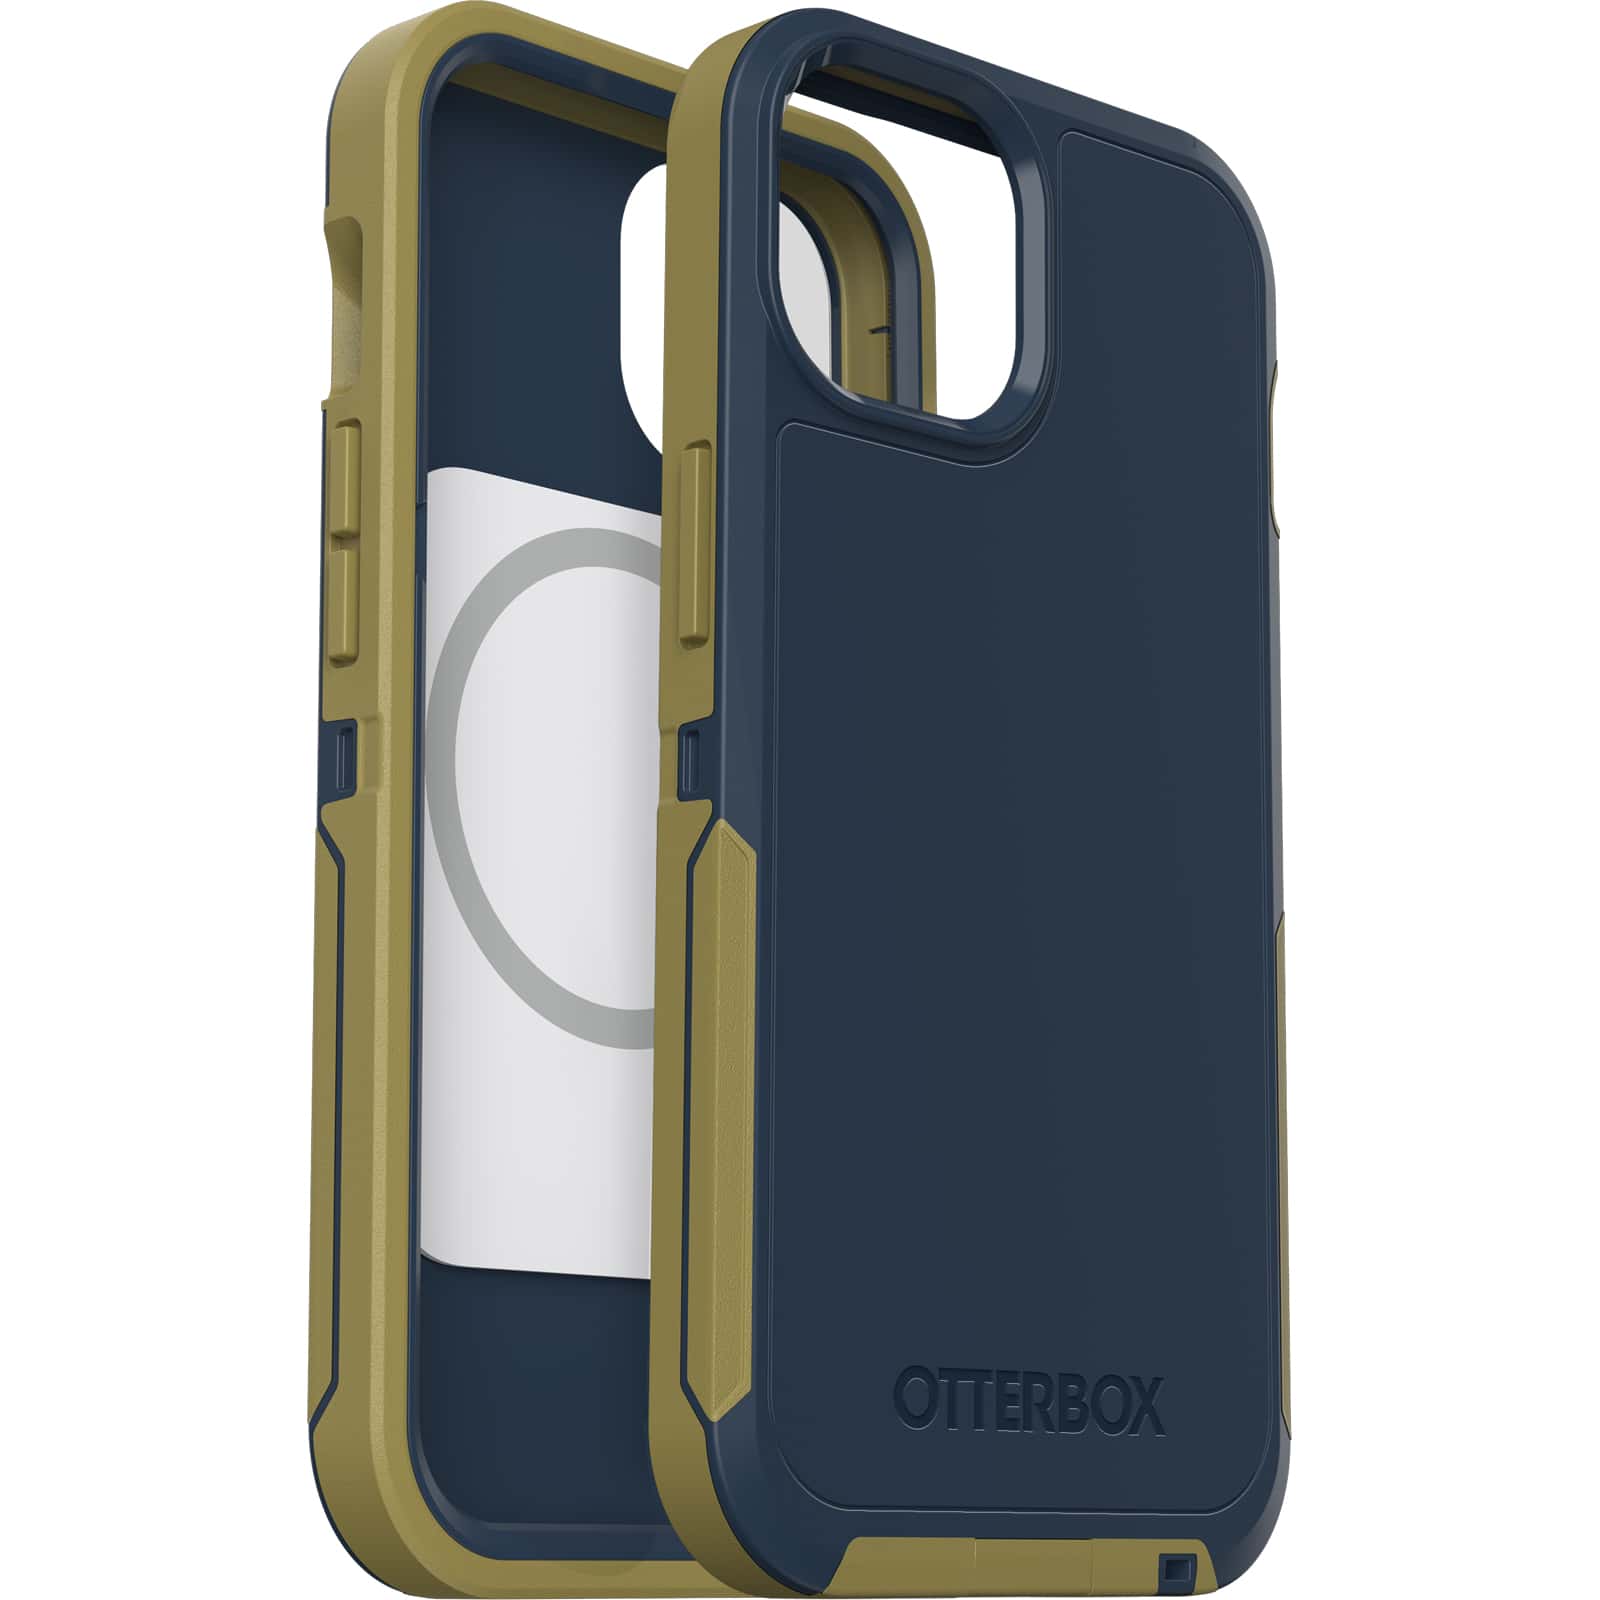 The OtterBox Defender Series Pro XT case defends your iPhone 13. 